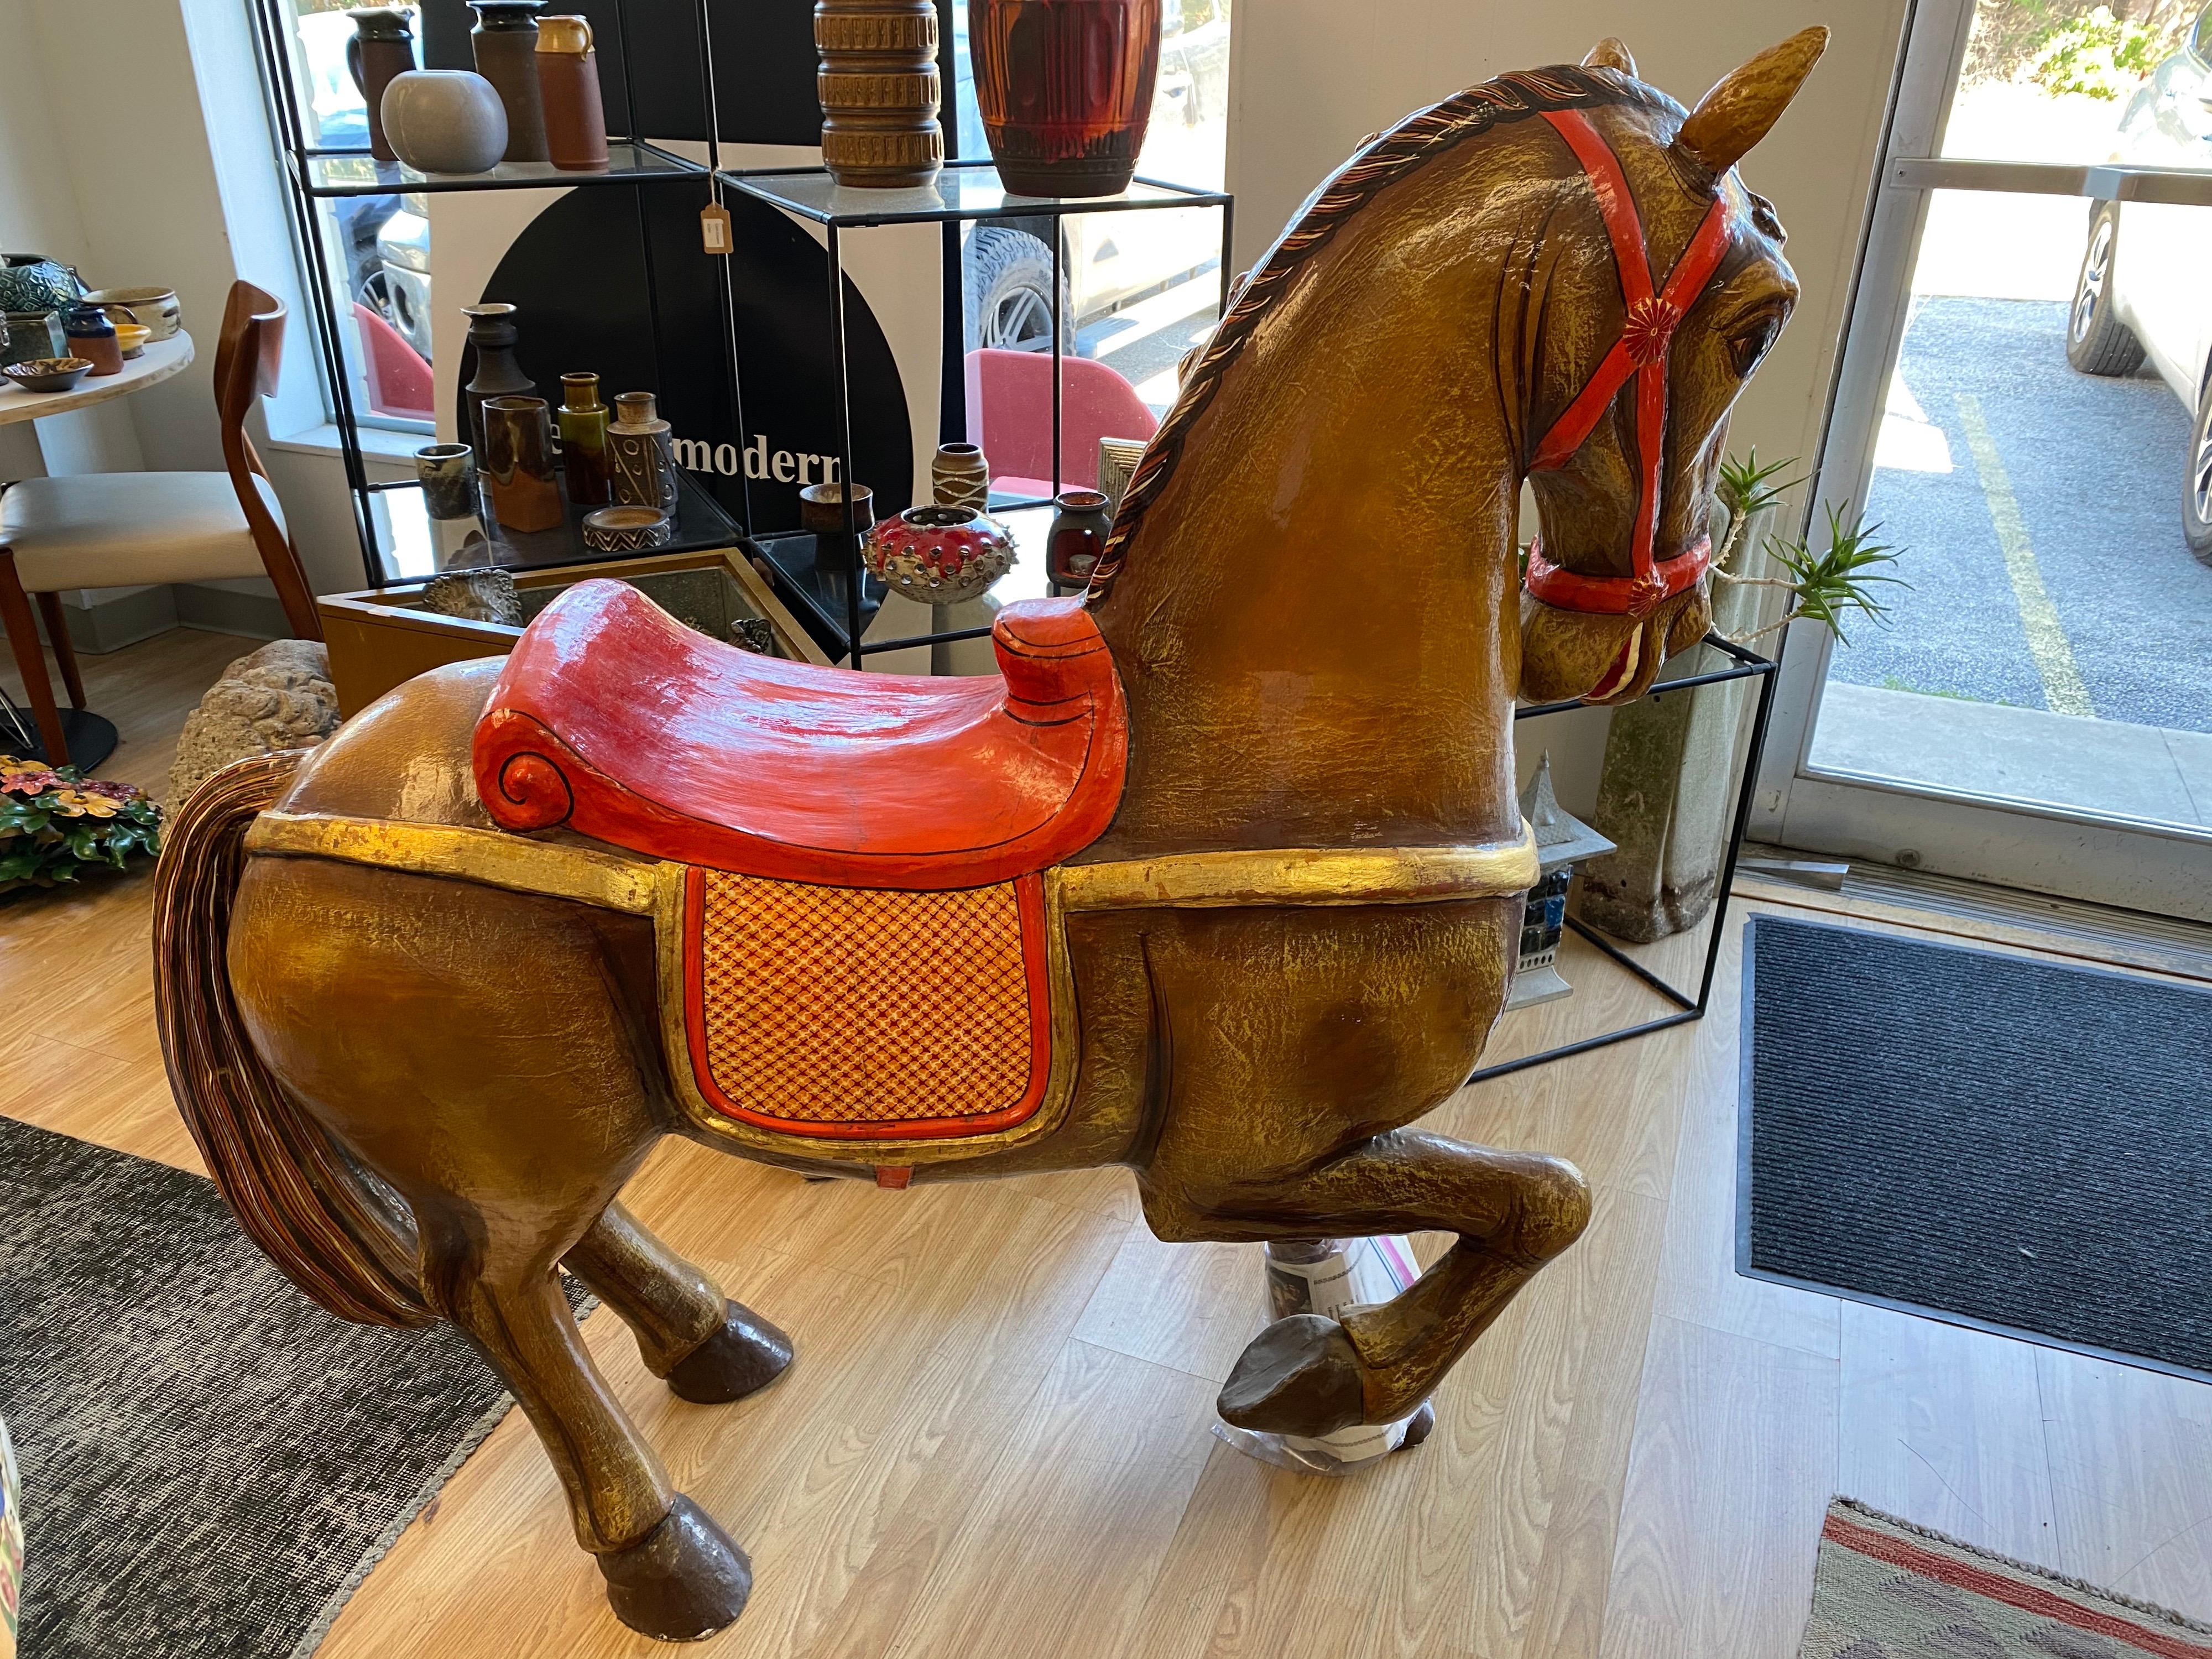 This beautiful carousel horse made of papier-mache designed by Mexican artist Sergio Bustamante comes with documentation papers and is signed and numbered. This vintage piece is in good overall condition; wear is mostly around the hooves. 